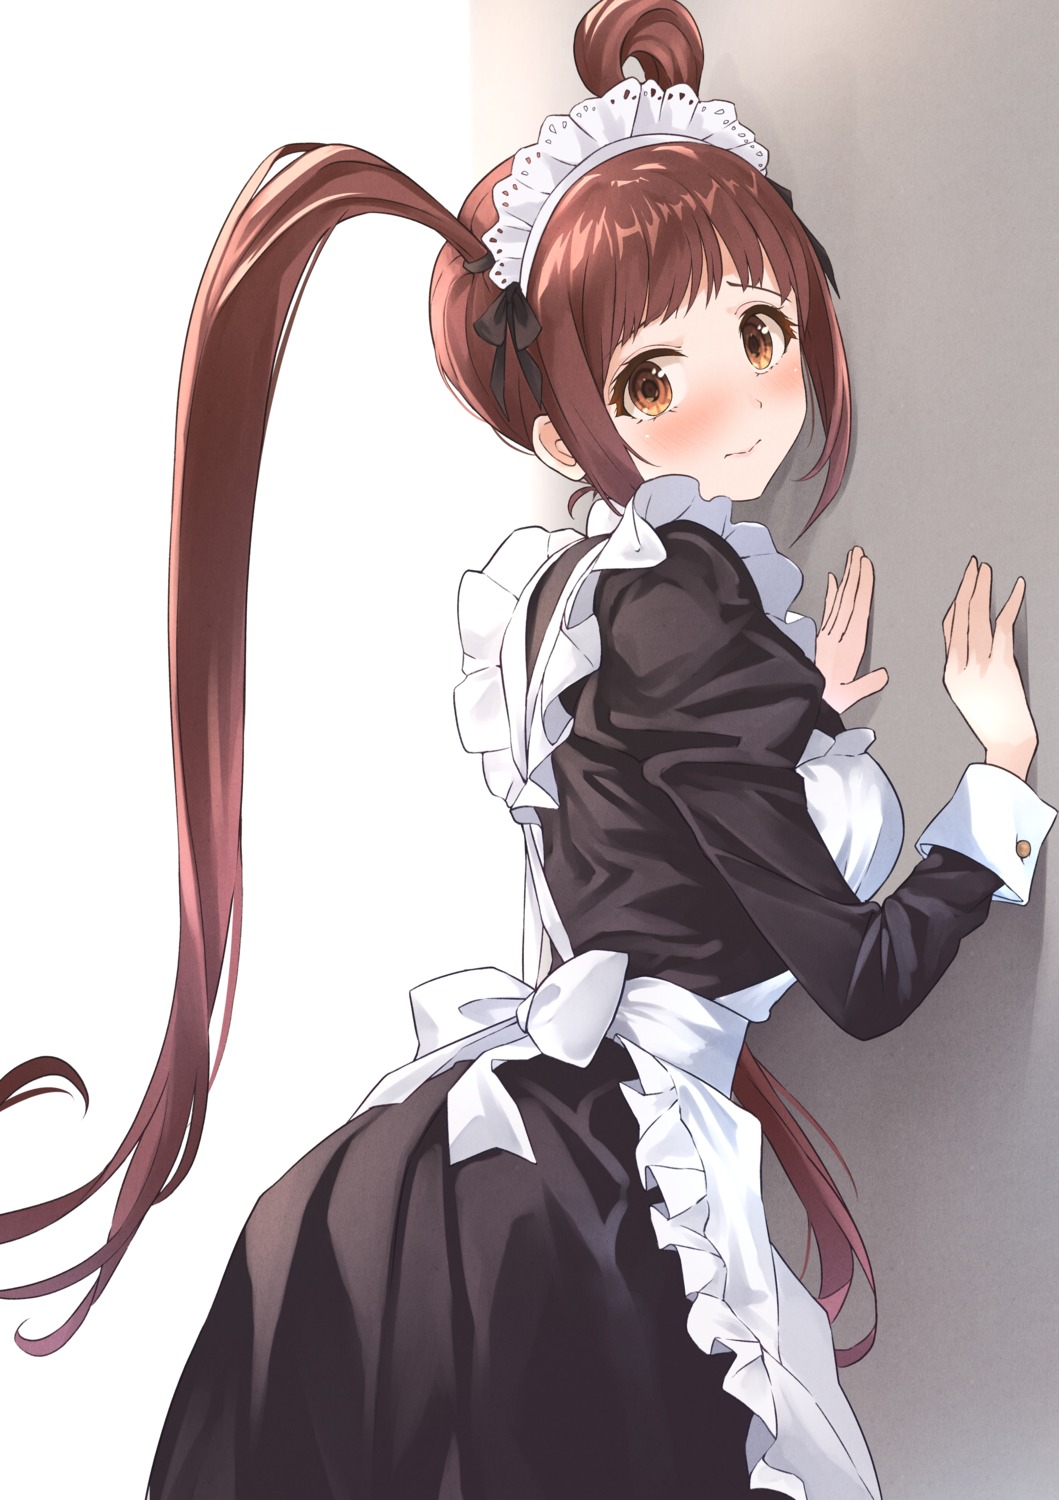 ass b1ack_illust maid matsuda_arisa the_idolm@ster the_idolm@ster_million_live!